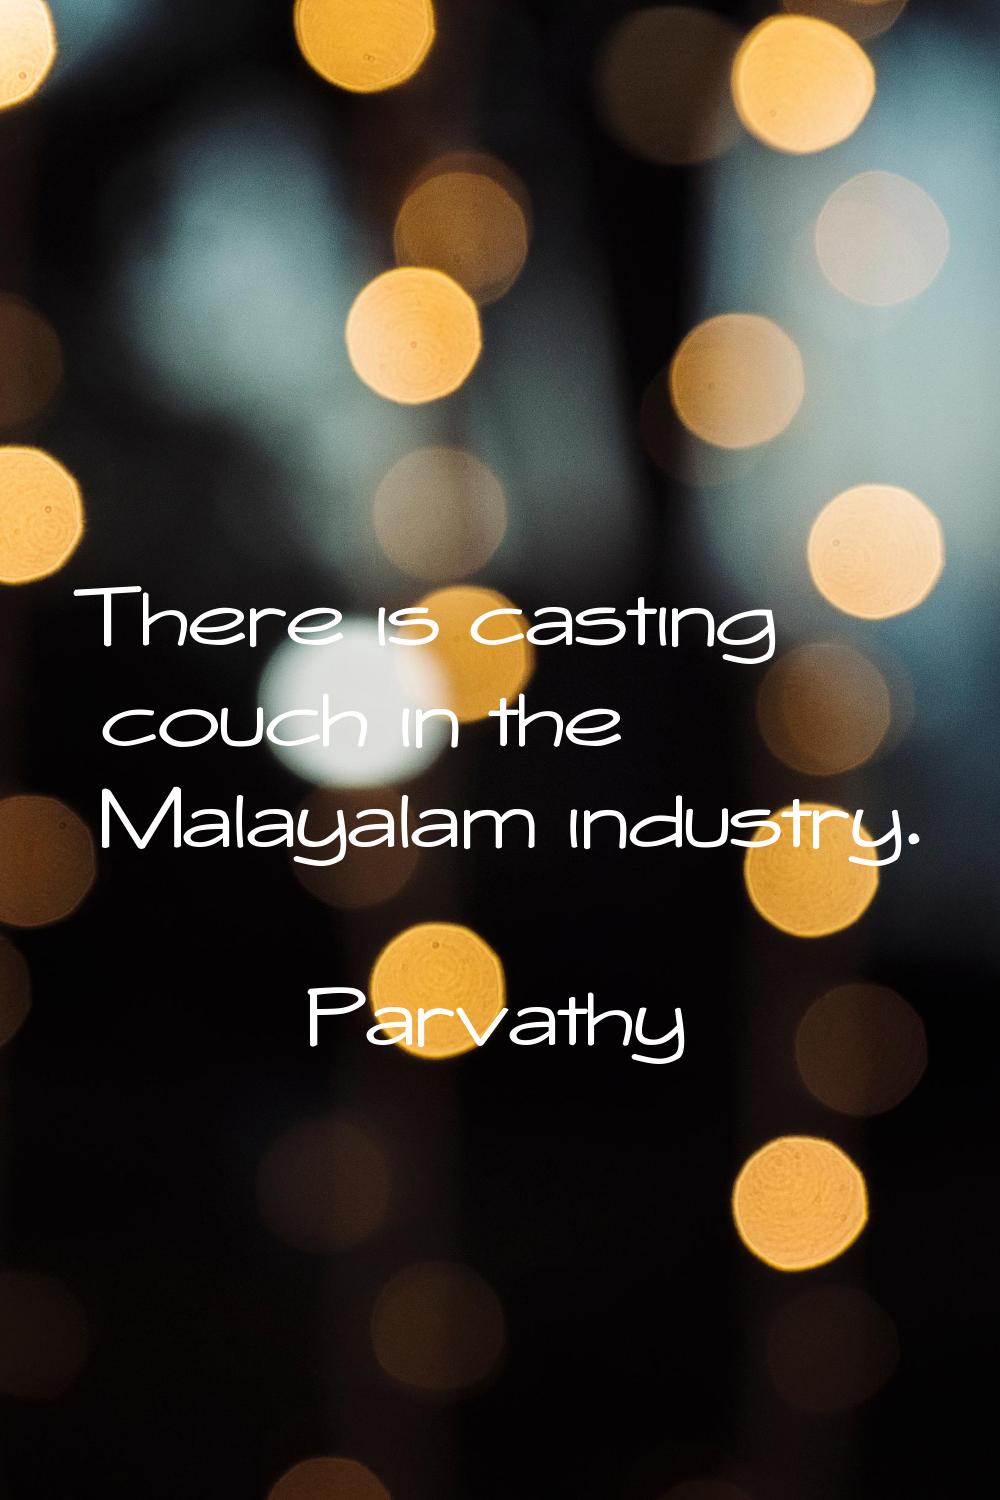 There is casting couch in the Malayalam industry.